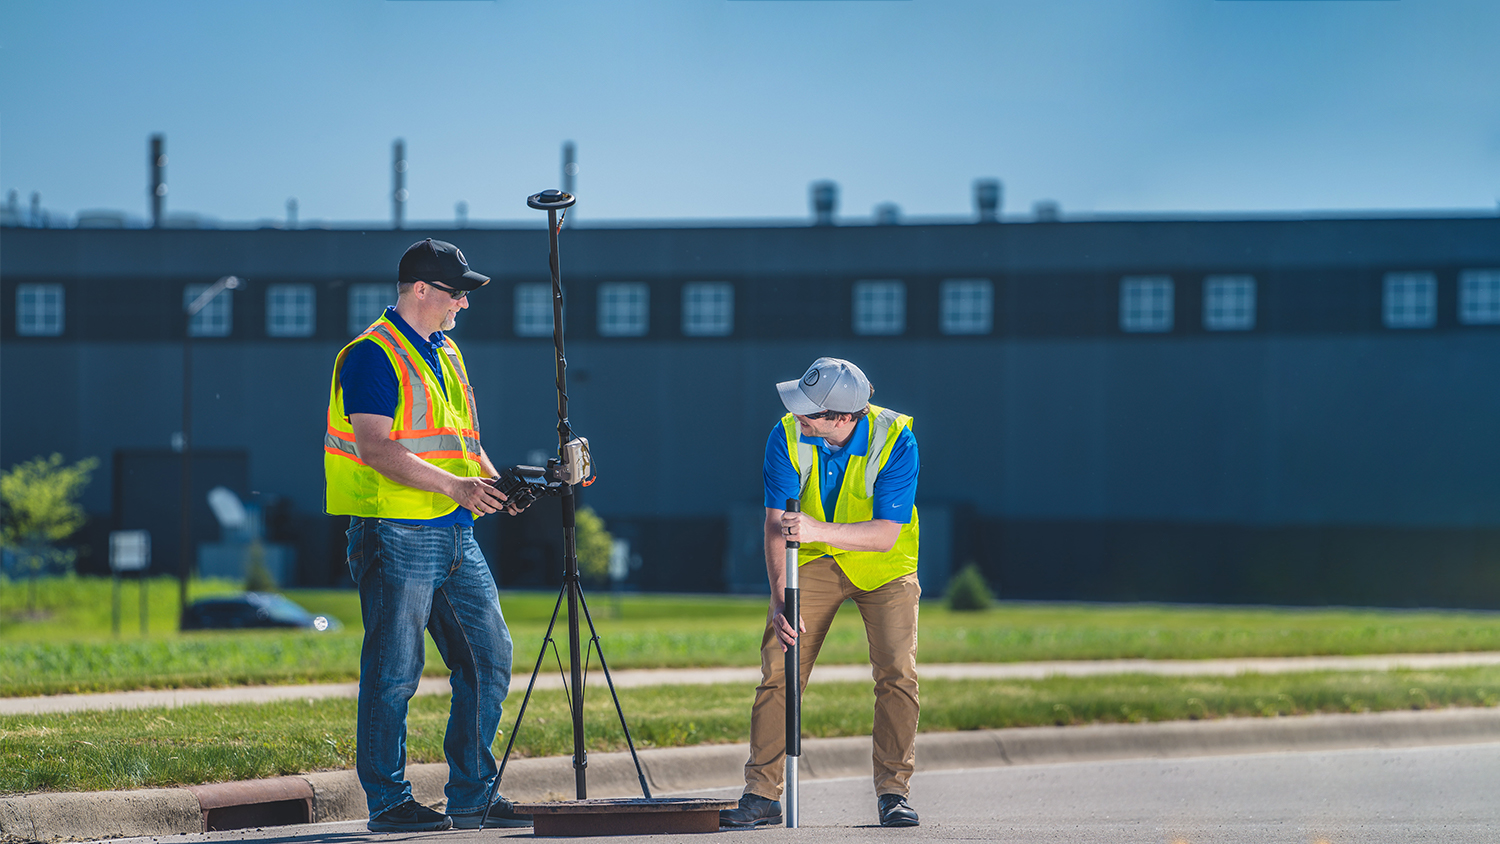 Consulting Firm Bolton and Menk Uses Eos Arrow GNSS Receivers for High Accuracy GNSS Data Collection for their Clients to have Accurate GIS